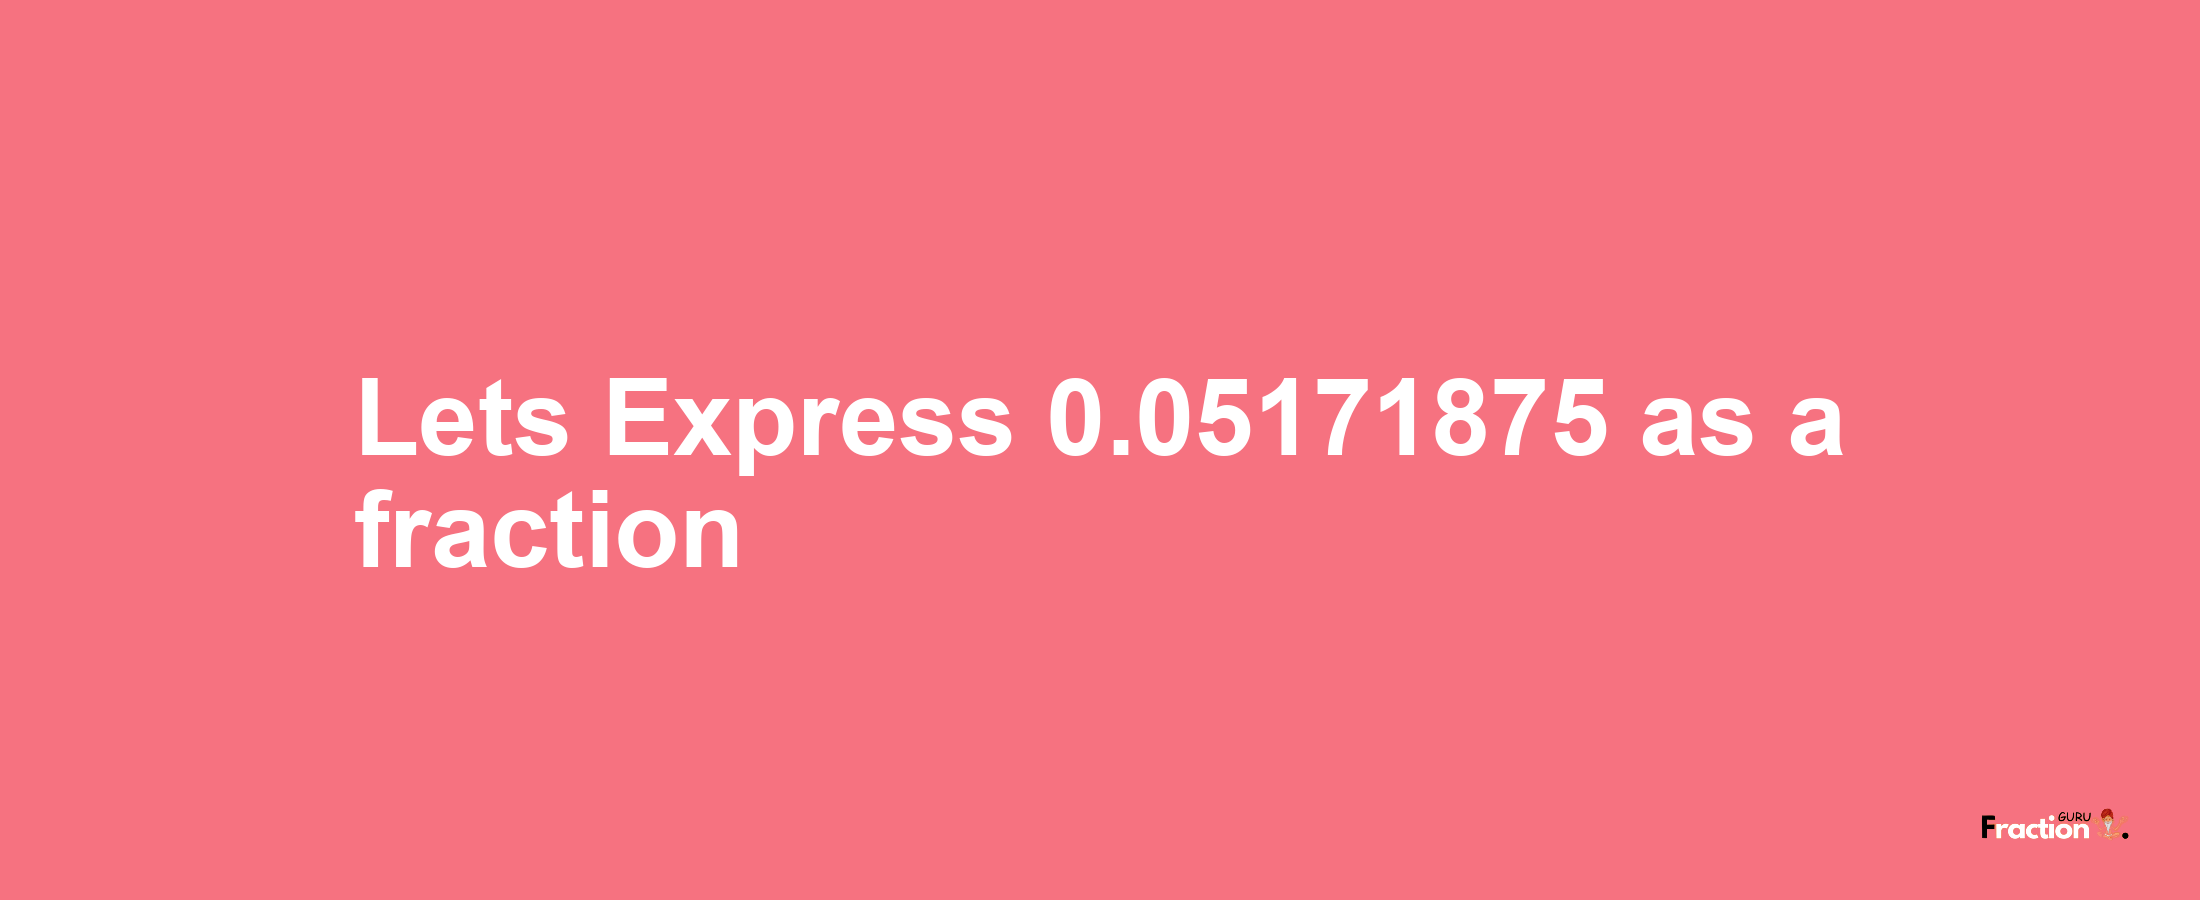 Lets Express 0.05171875 as afraction